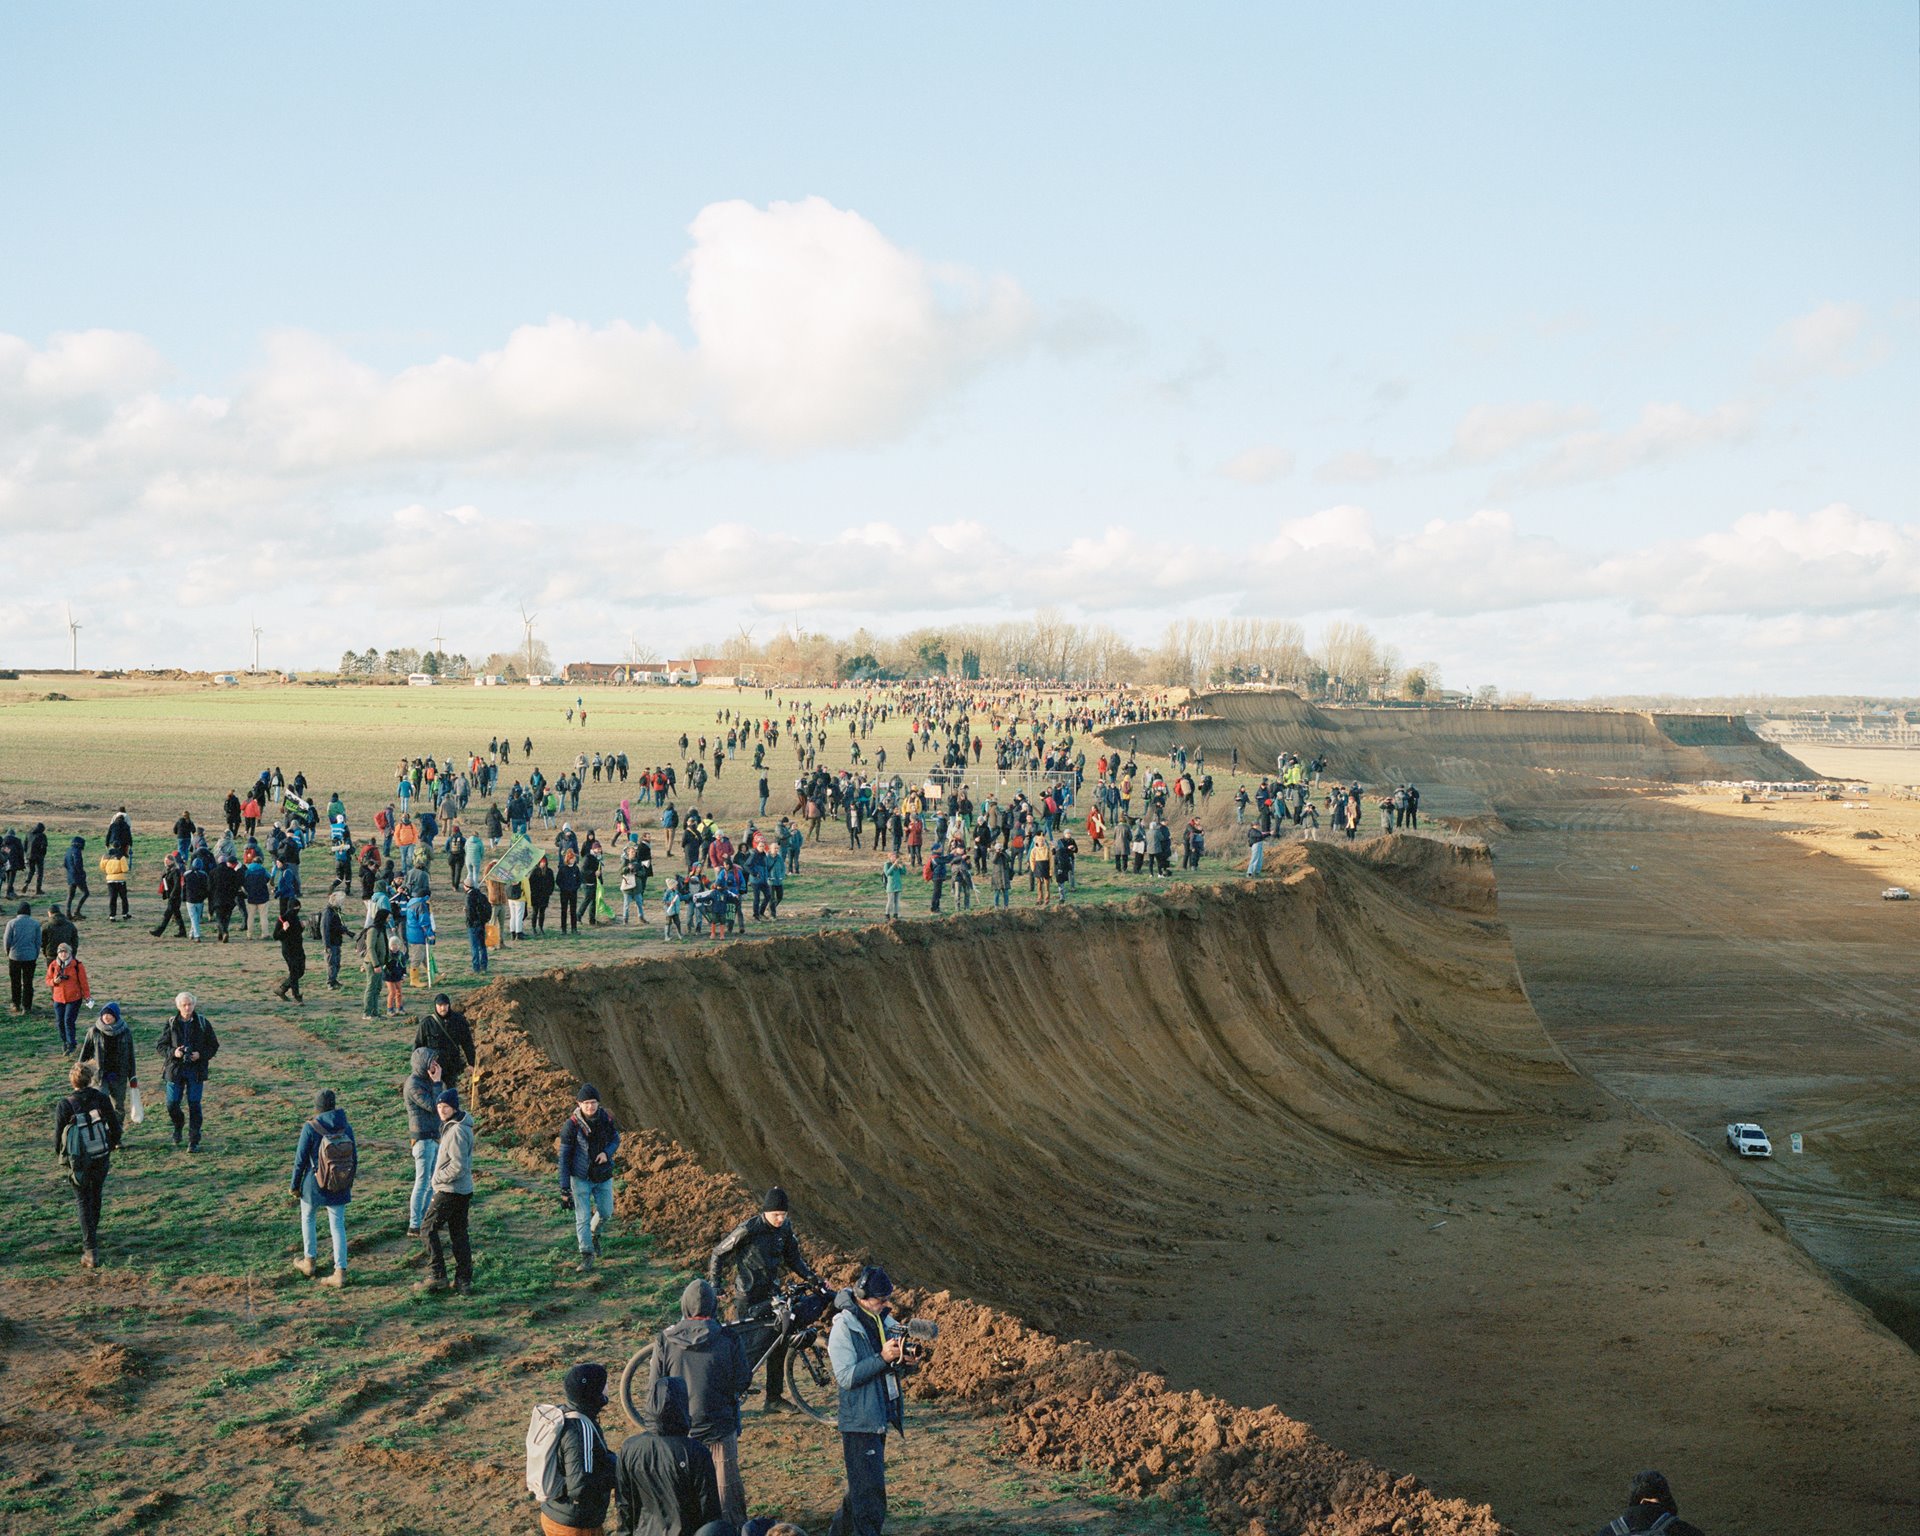 Demonstrators walk along the advancing edge of the Garzweiler II open-pit mine near Lützerath, Germany, on the last weekend they could legally enter the village.